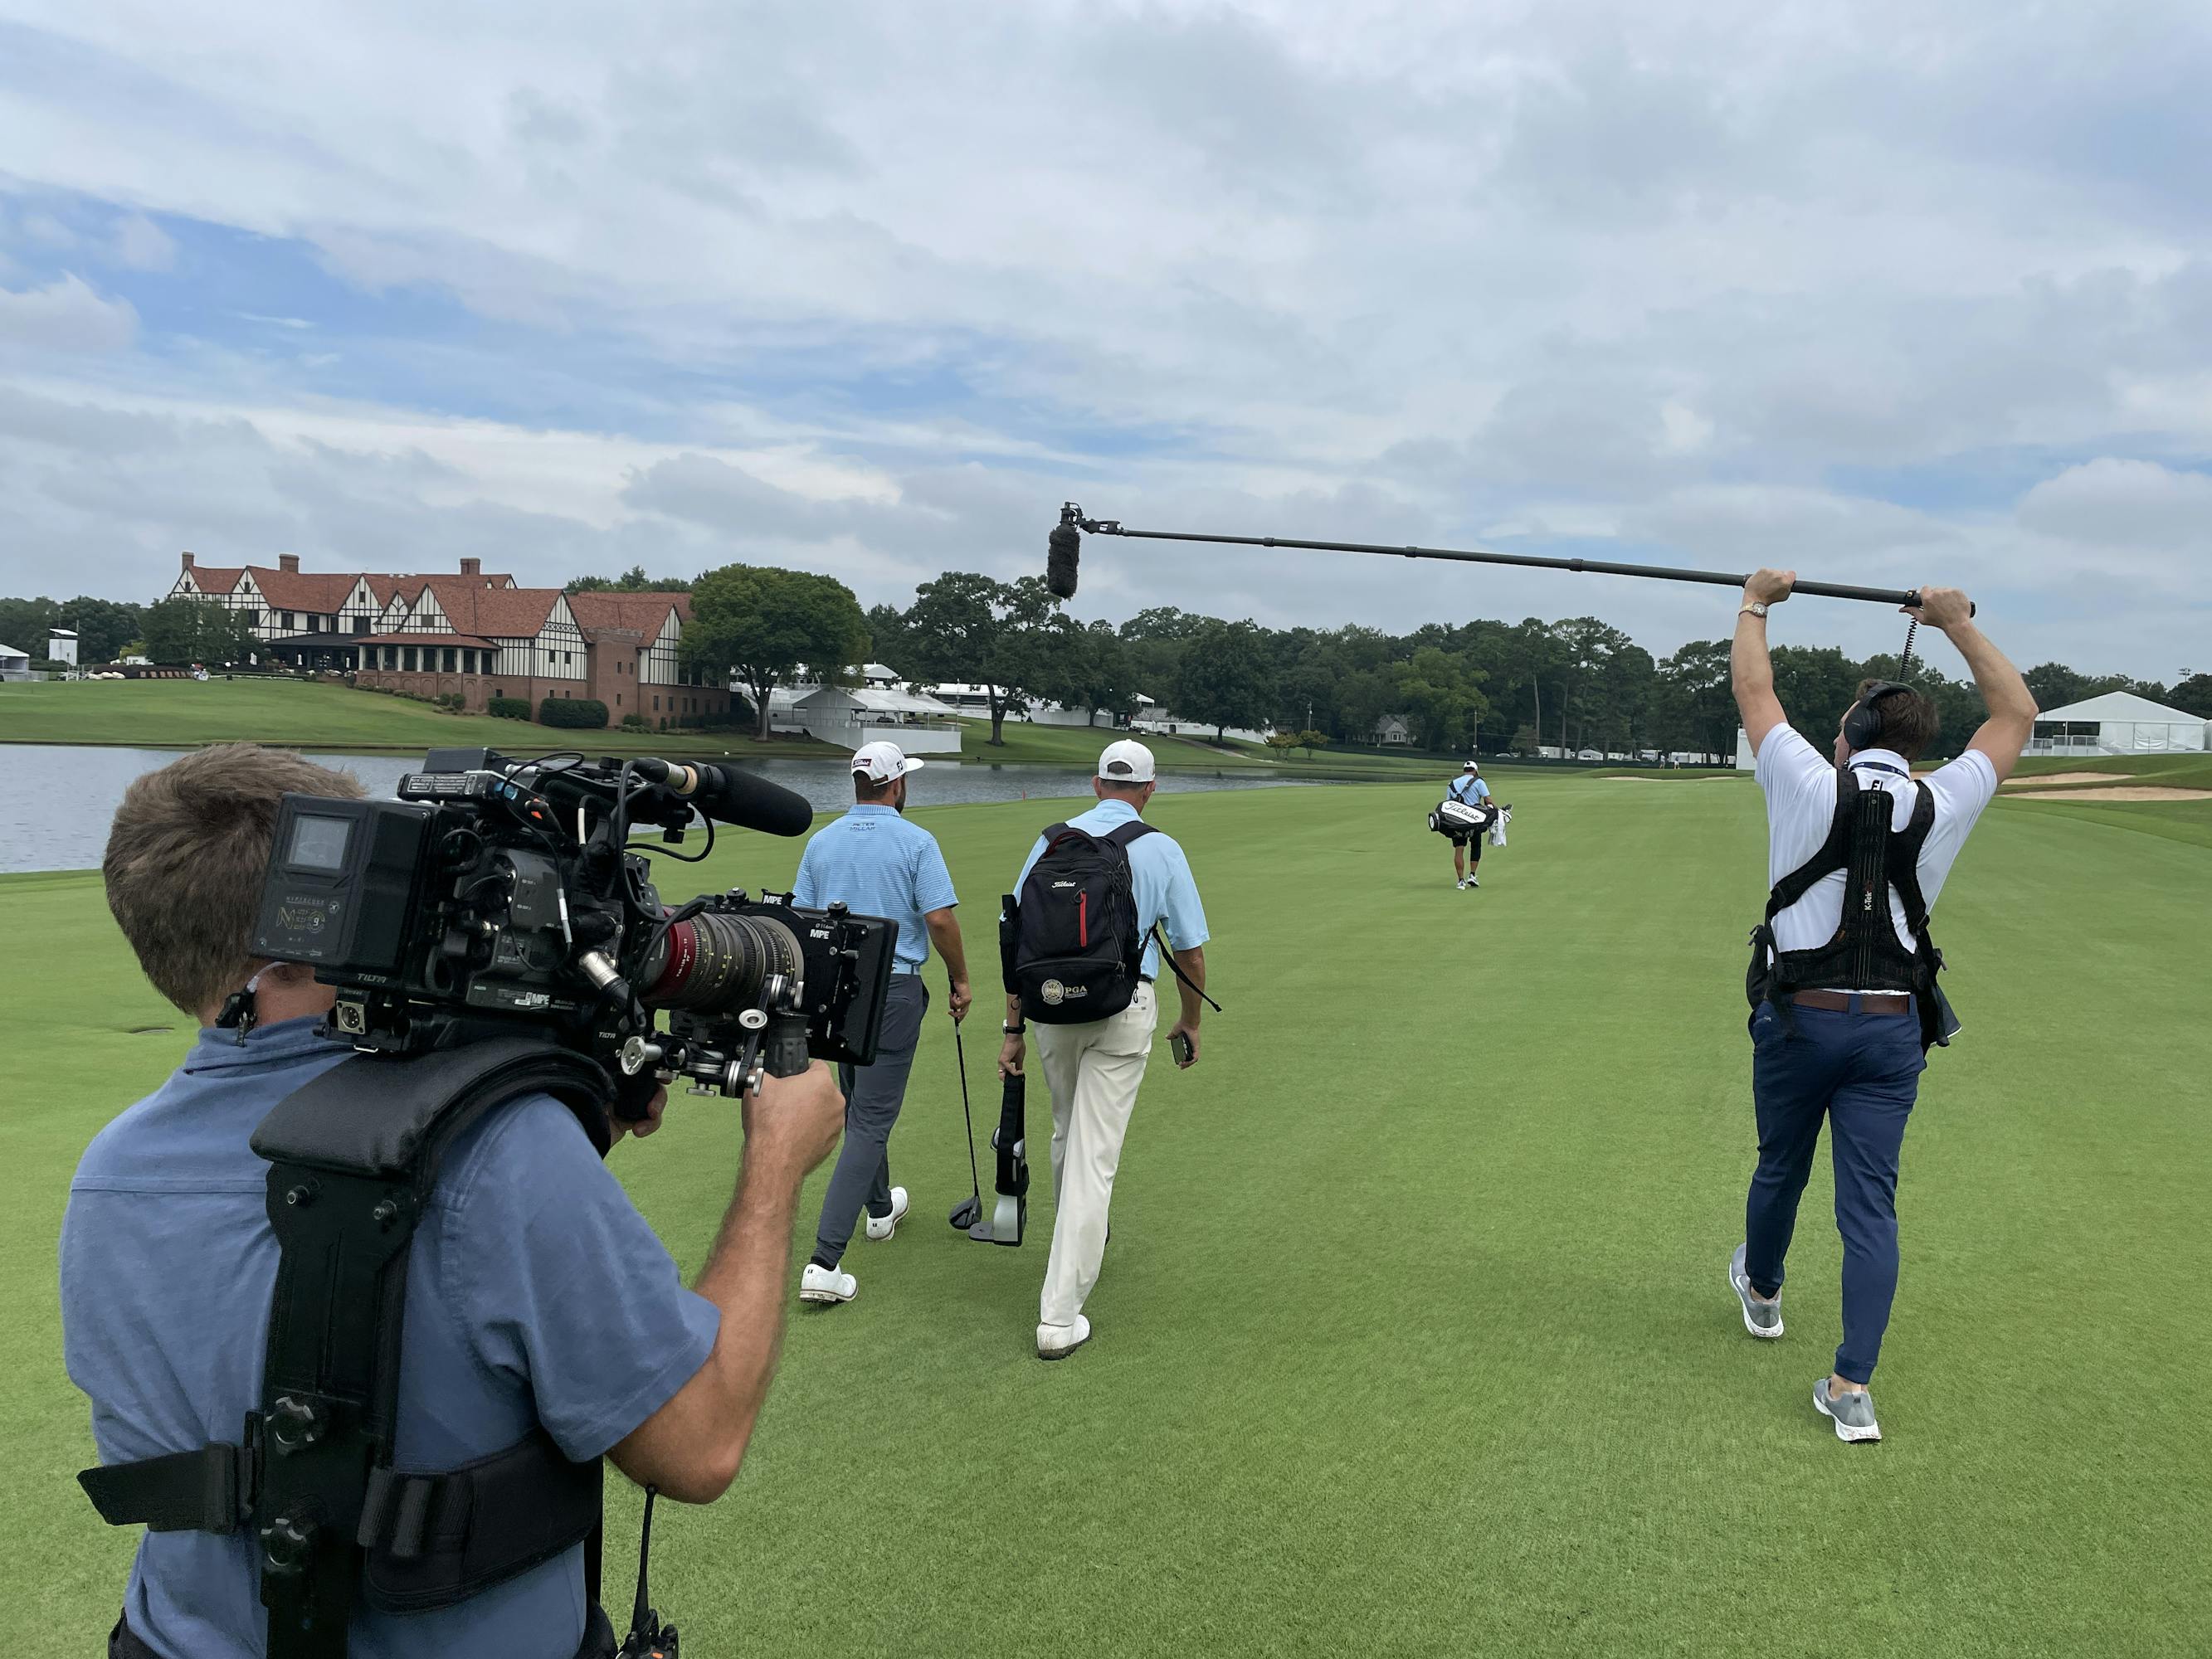 A golfer and his caddie walk along the green, trailed by a cameraman and a boom operator.